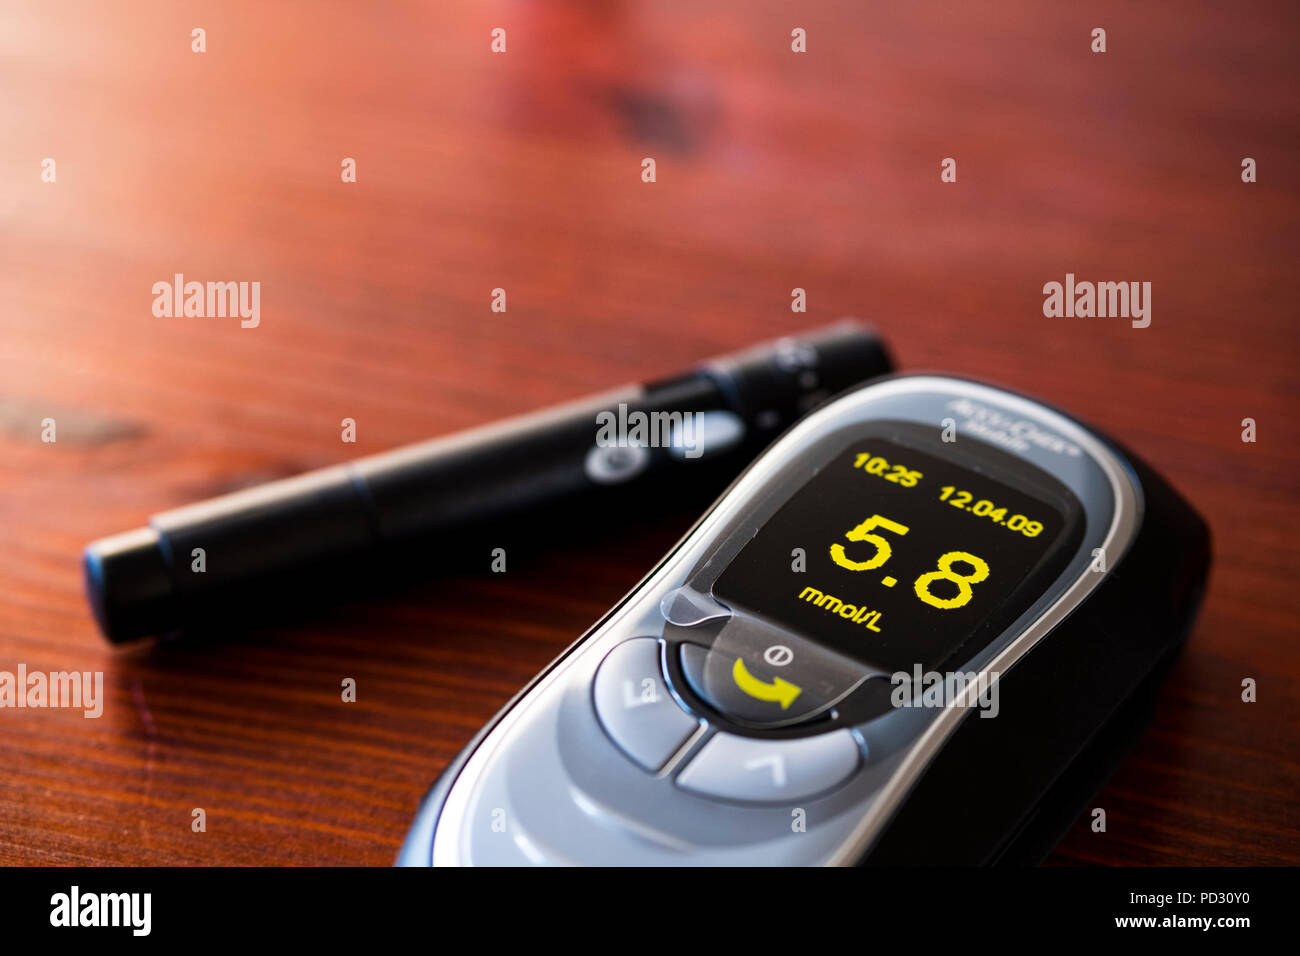 BG meter with lancing device Stock Photo